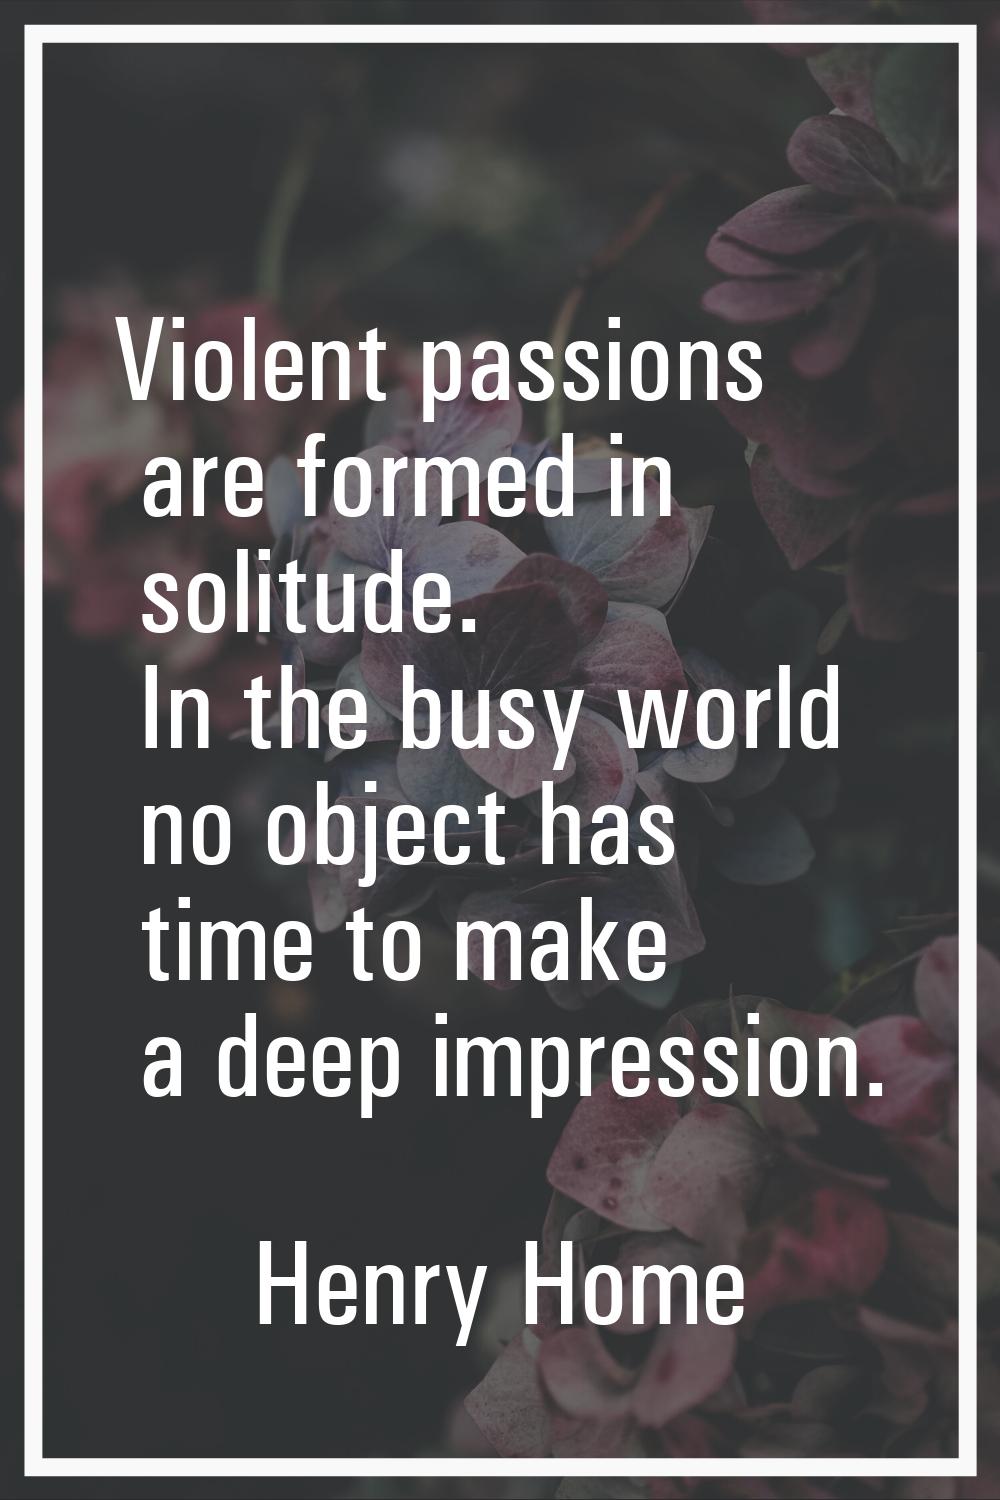 Violent passions are formed in solitude. In the busy world no object has time to make a deep impres